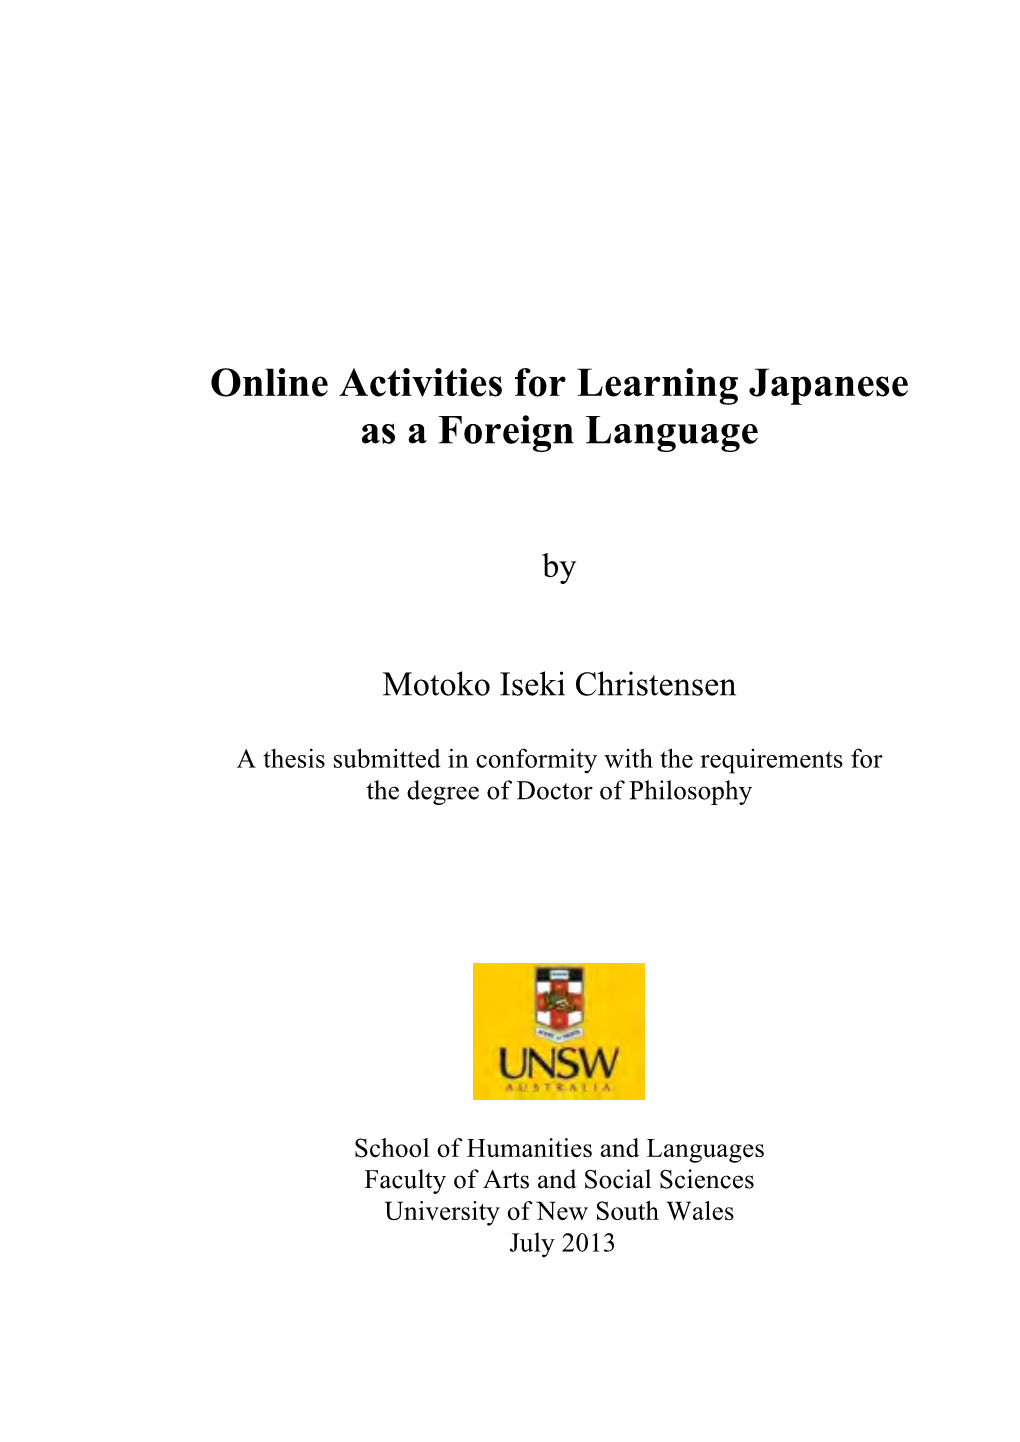 Online Activities for Learning Japanese As a Foreign Language